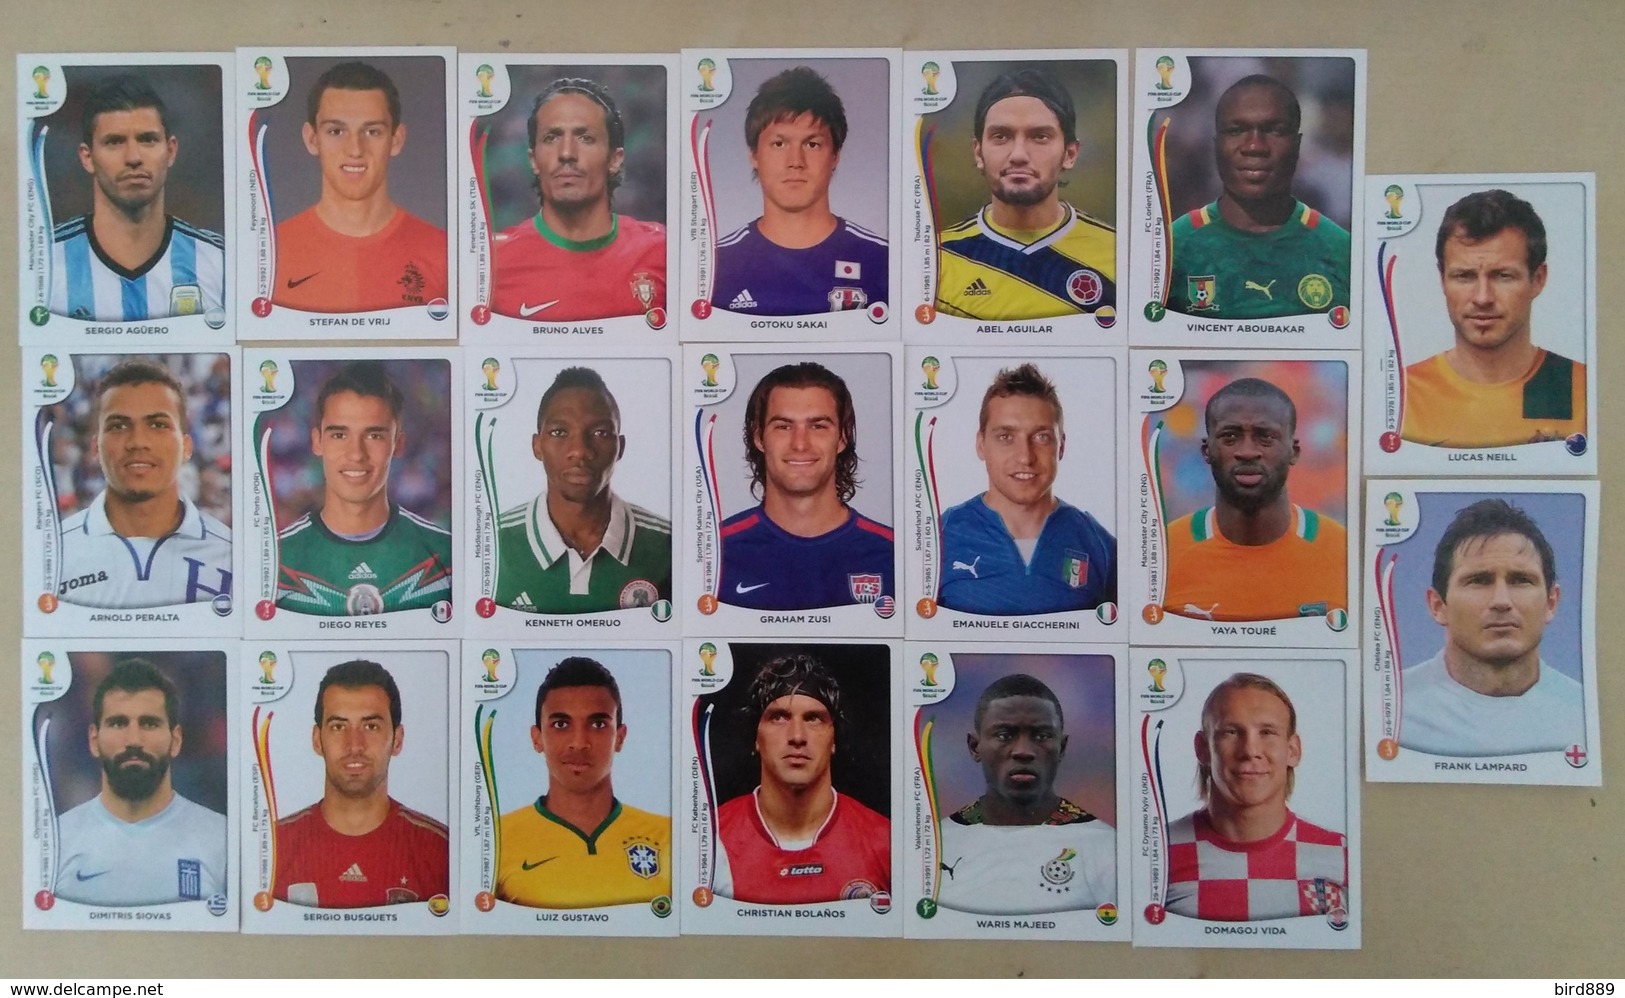 2014 FIFA World Cup 20 Different Panini Stickers New - English Edition